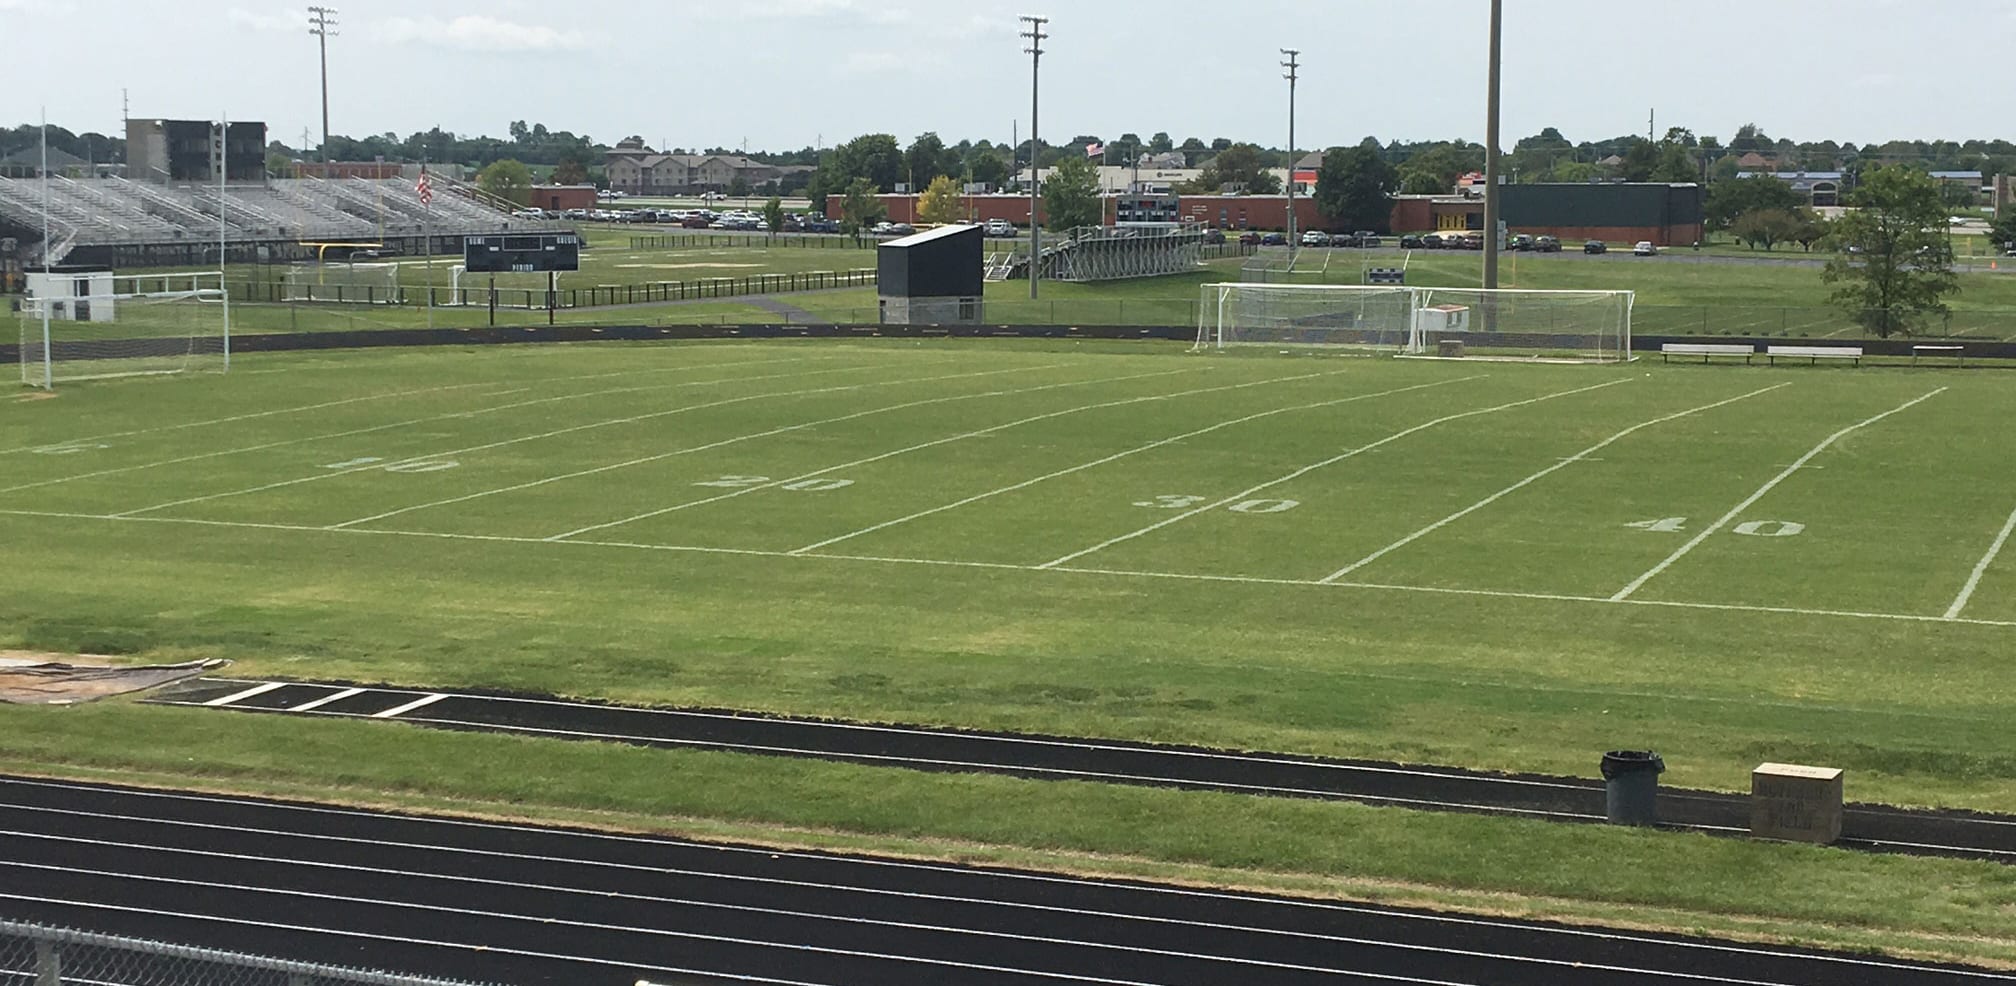 landscape view of soccer field with fresh mowed grass and line marking